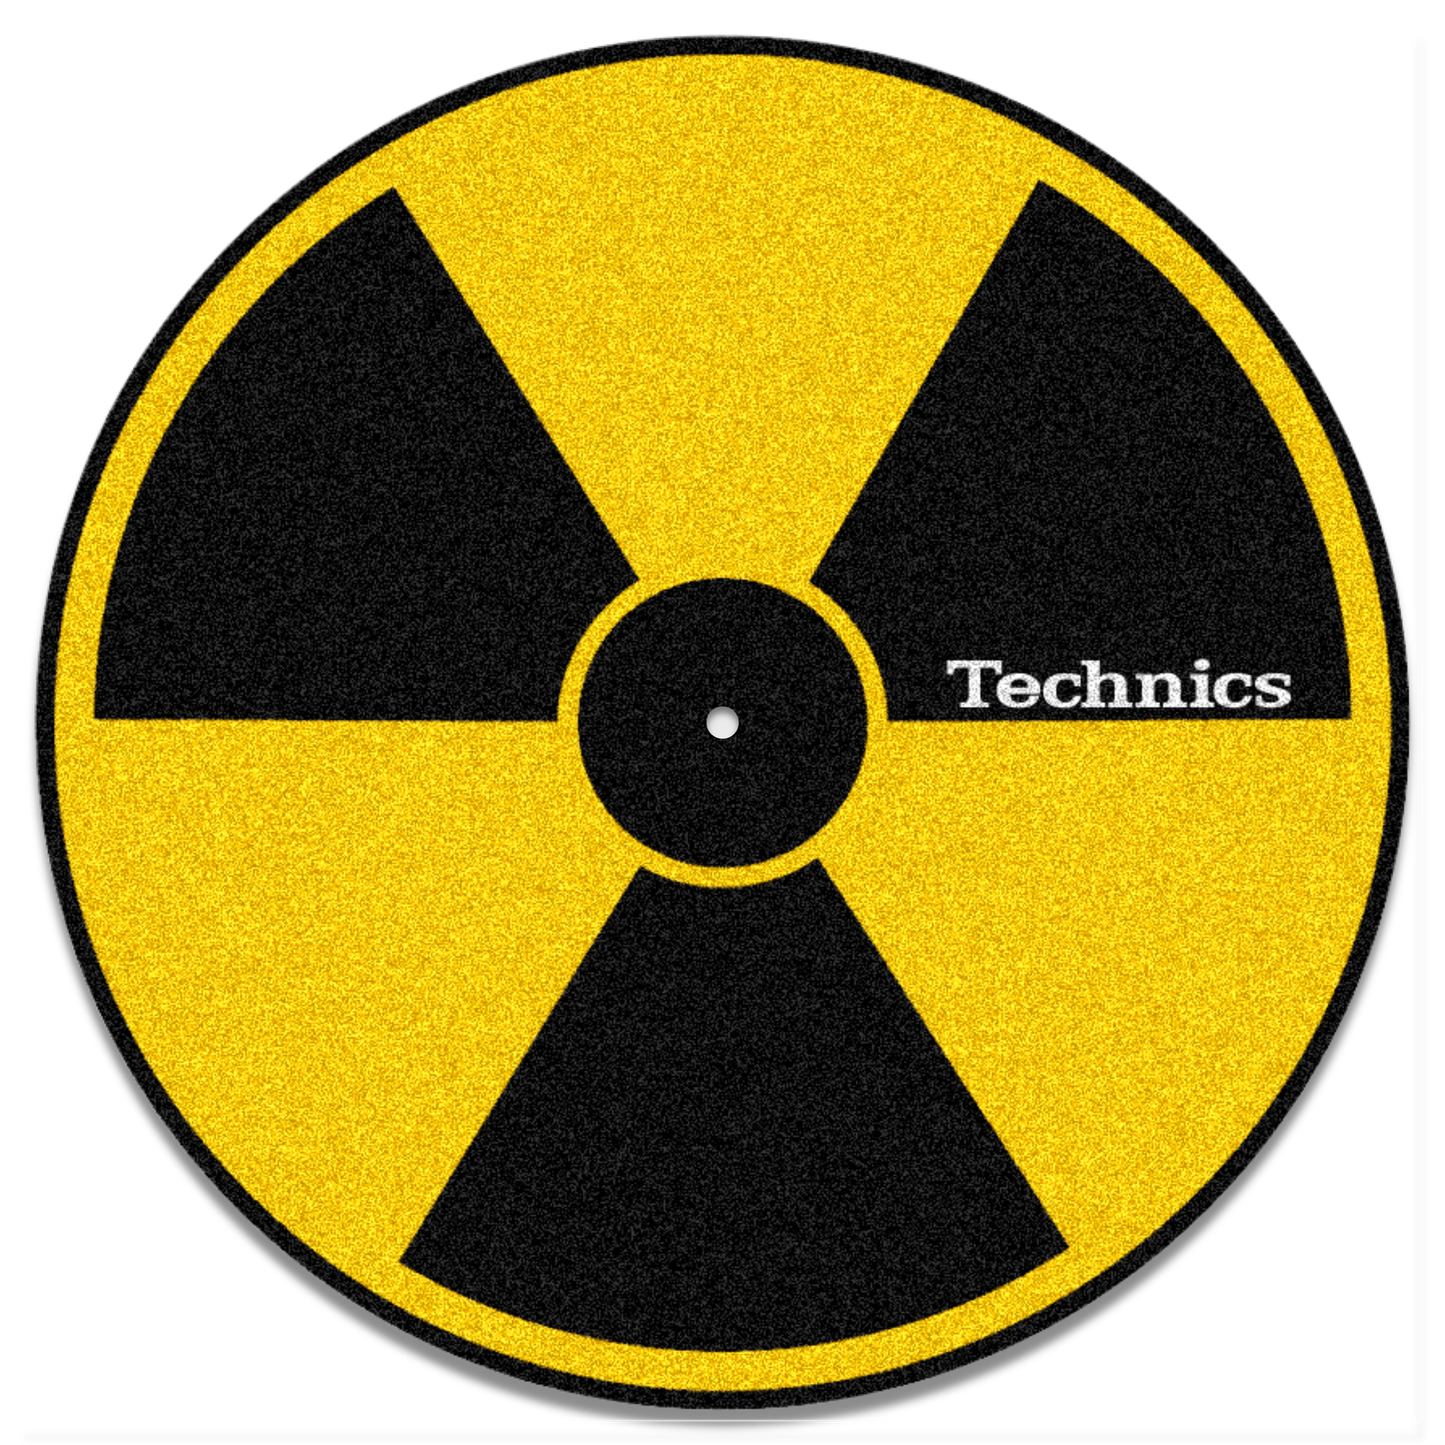 (Set of 20 or 50 pieces) Technics x Nuclear sign slip mats